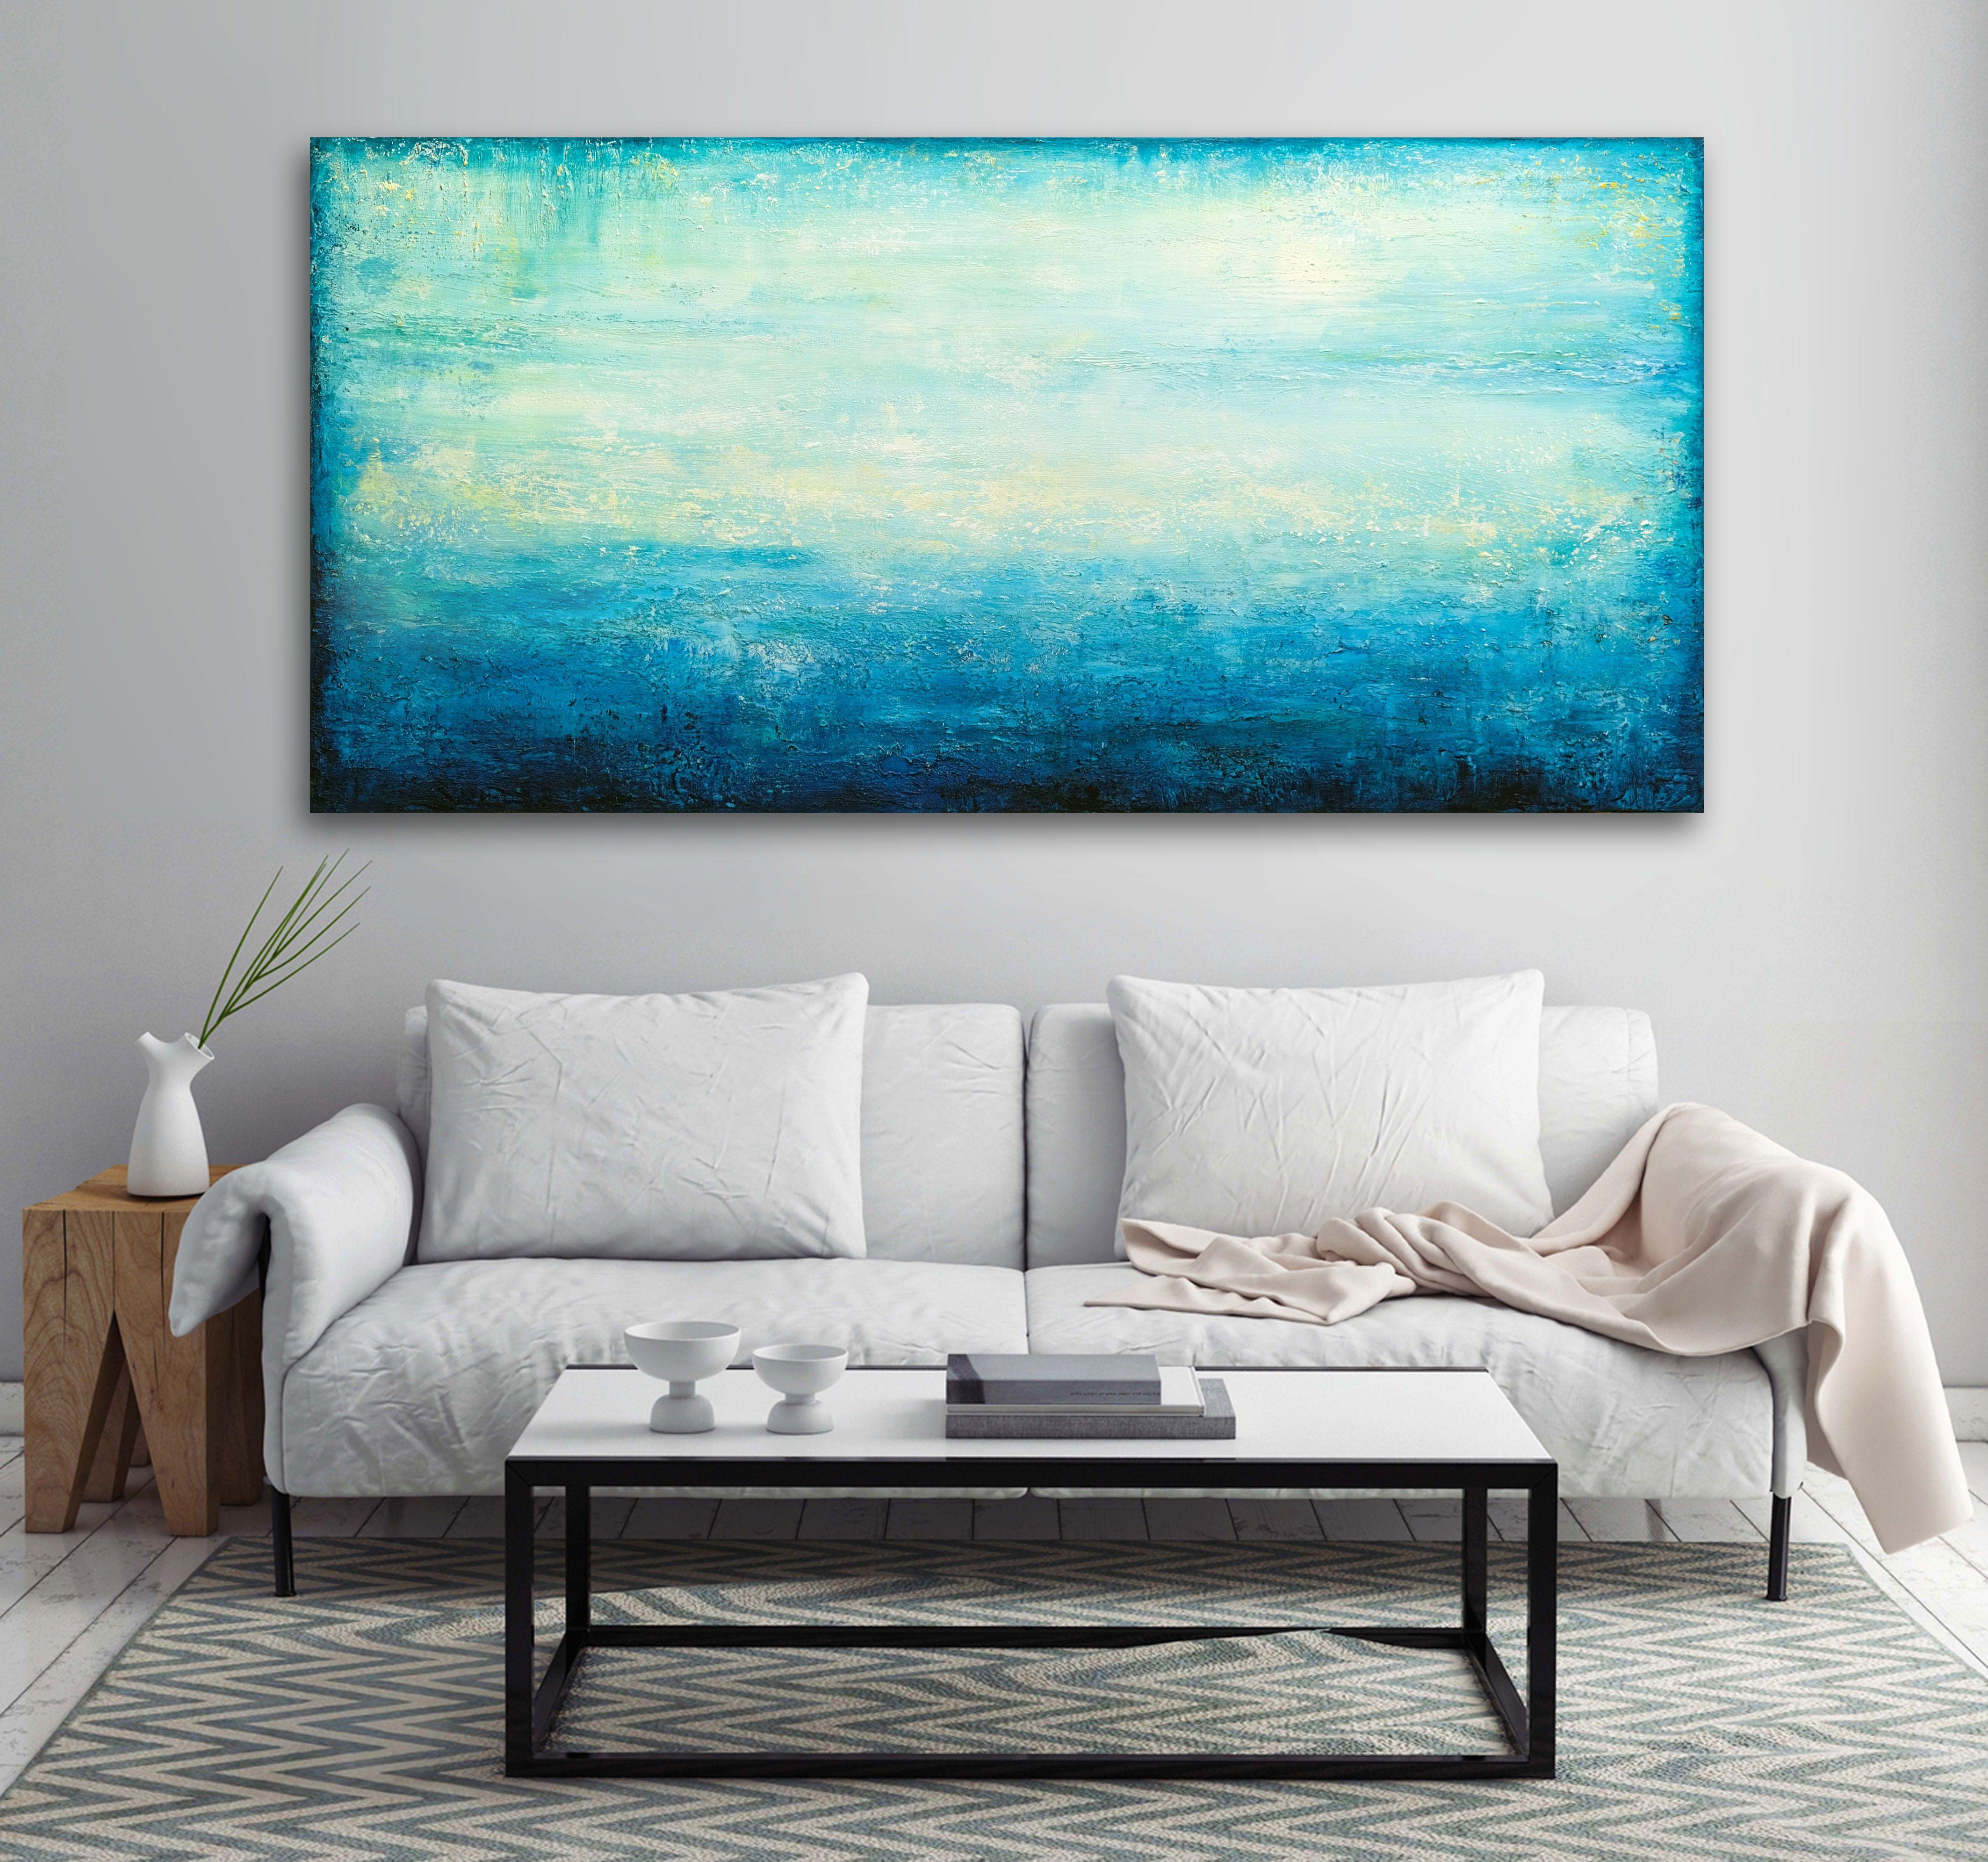 Large original abstract painting with turquoise colors that makes you feel relaxed and peaceful.  It was painted in multiple layers with palette knife and brushes.  The artwork is signed on the back and includes a Certificate of Authenticity.  The